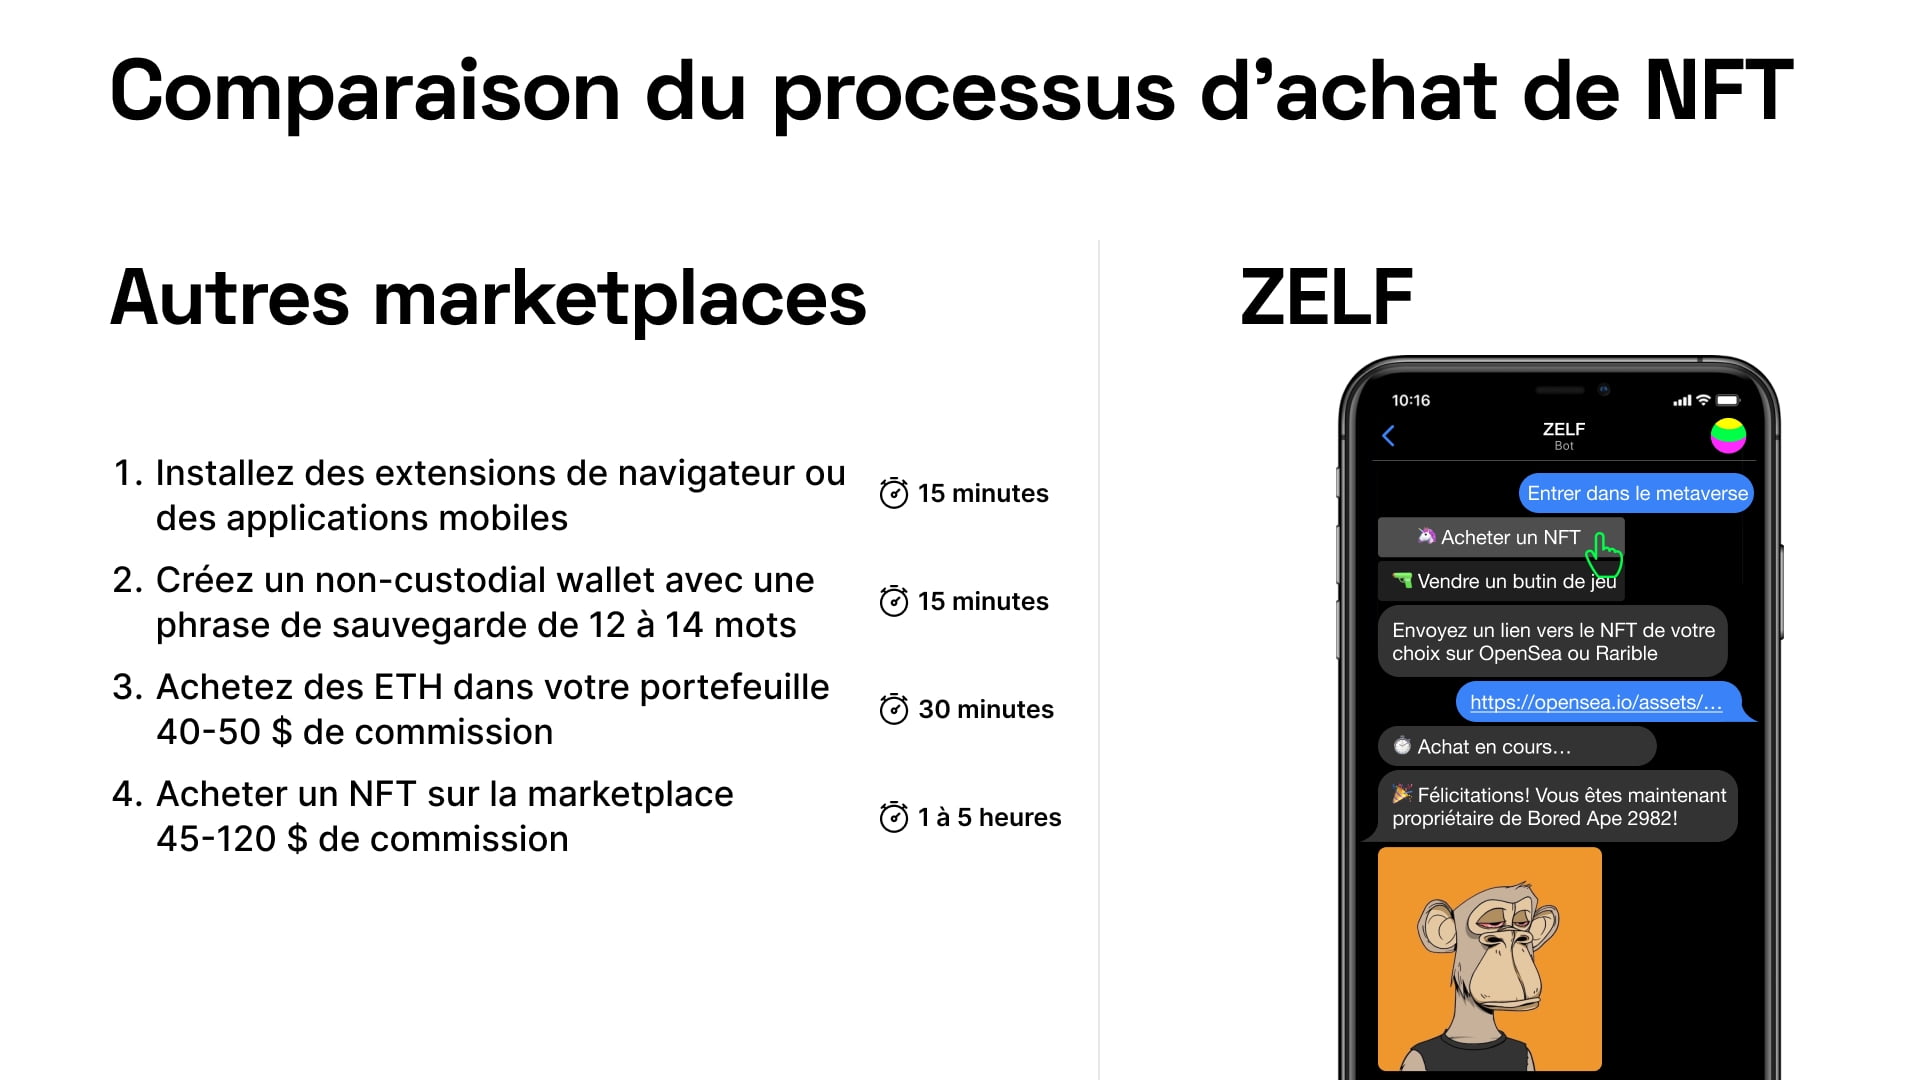 NFT Buying Comparison Between Self and Other Marketplaces